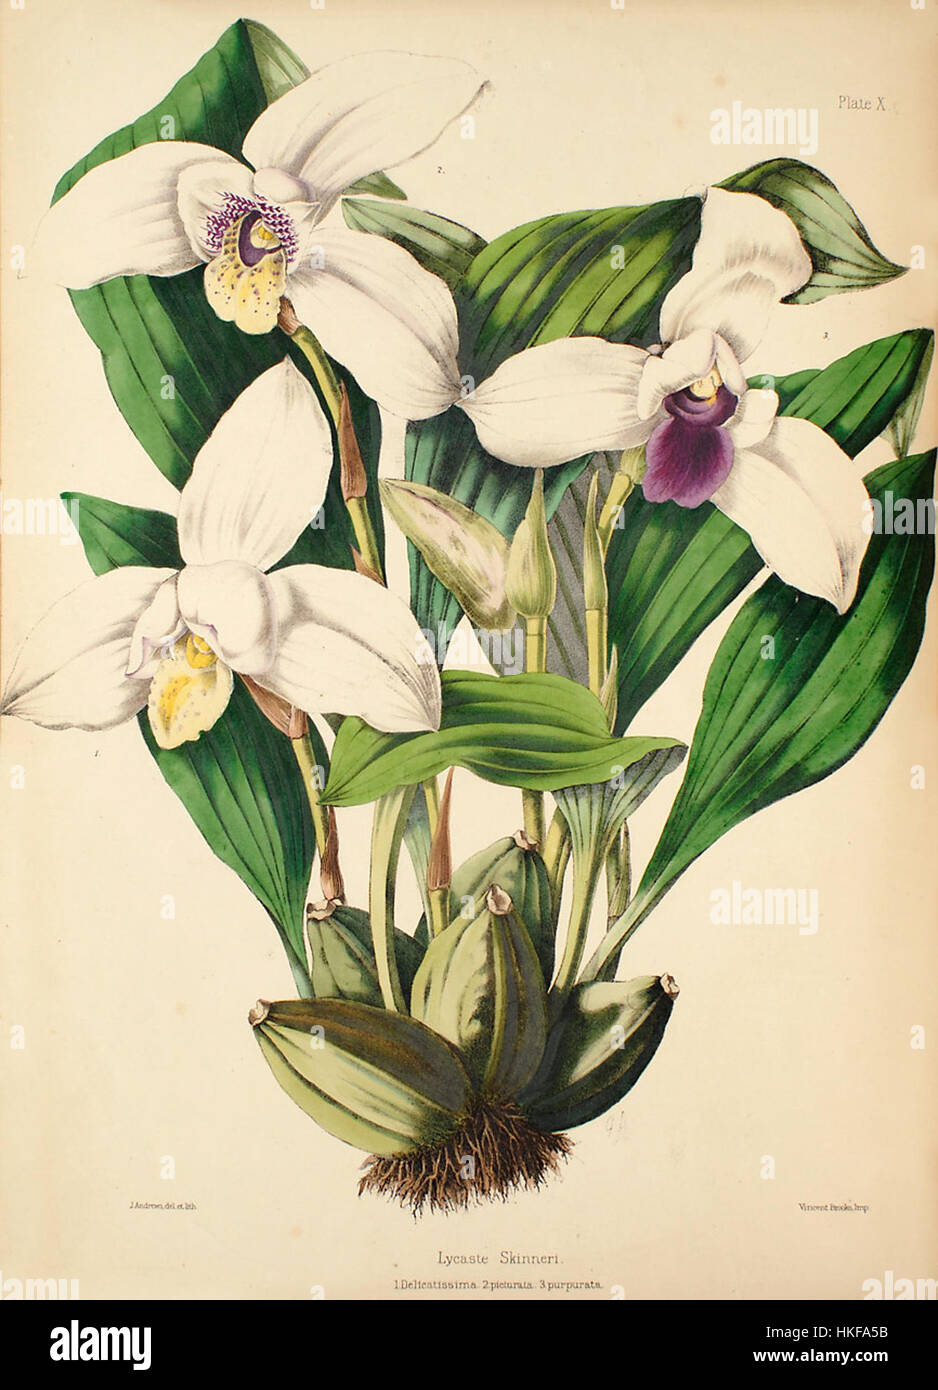 Lycaste skinneri   Warner, Williams   Select orch. plants 1, pl. 10 (1862 1865) Stock Photo